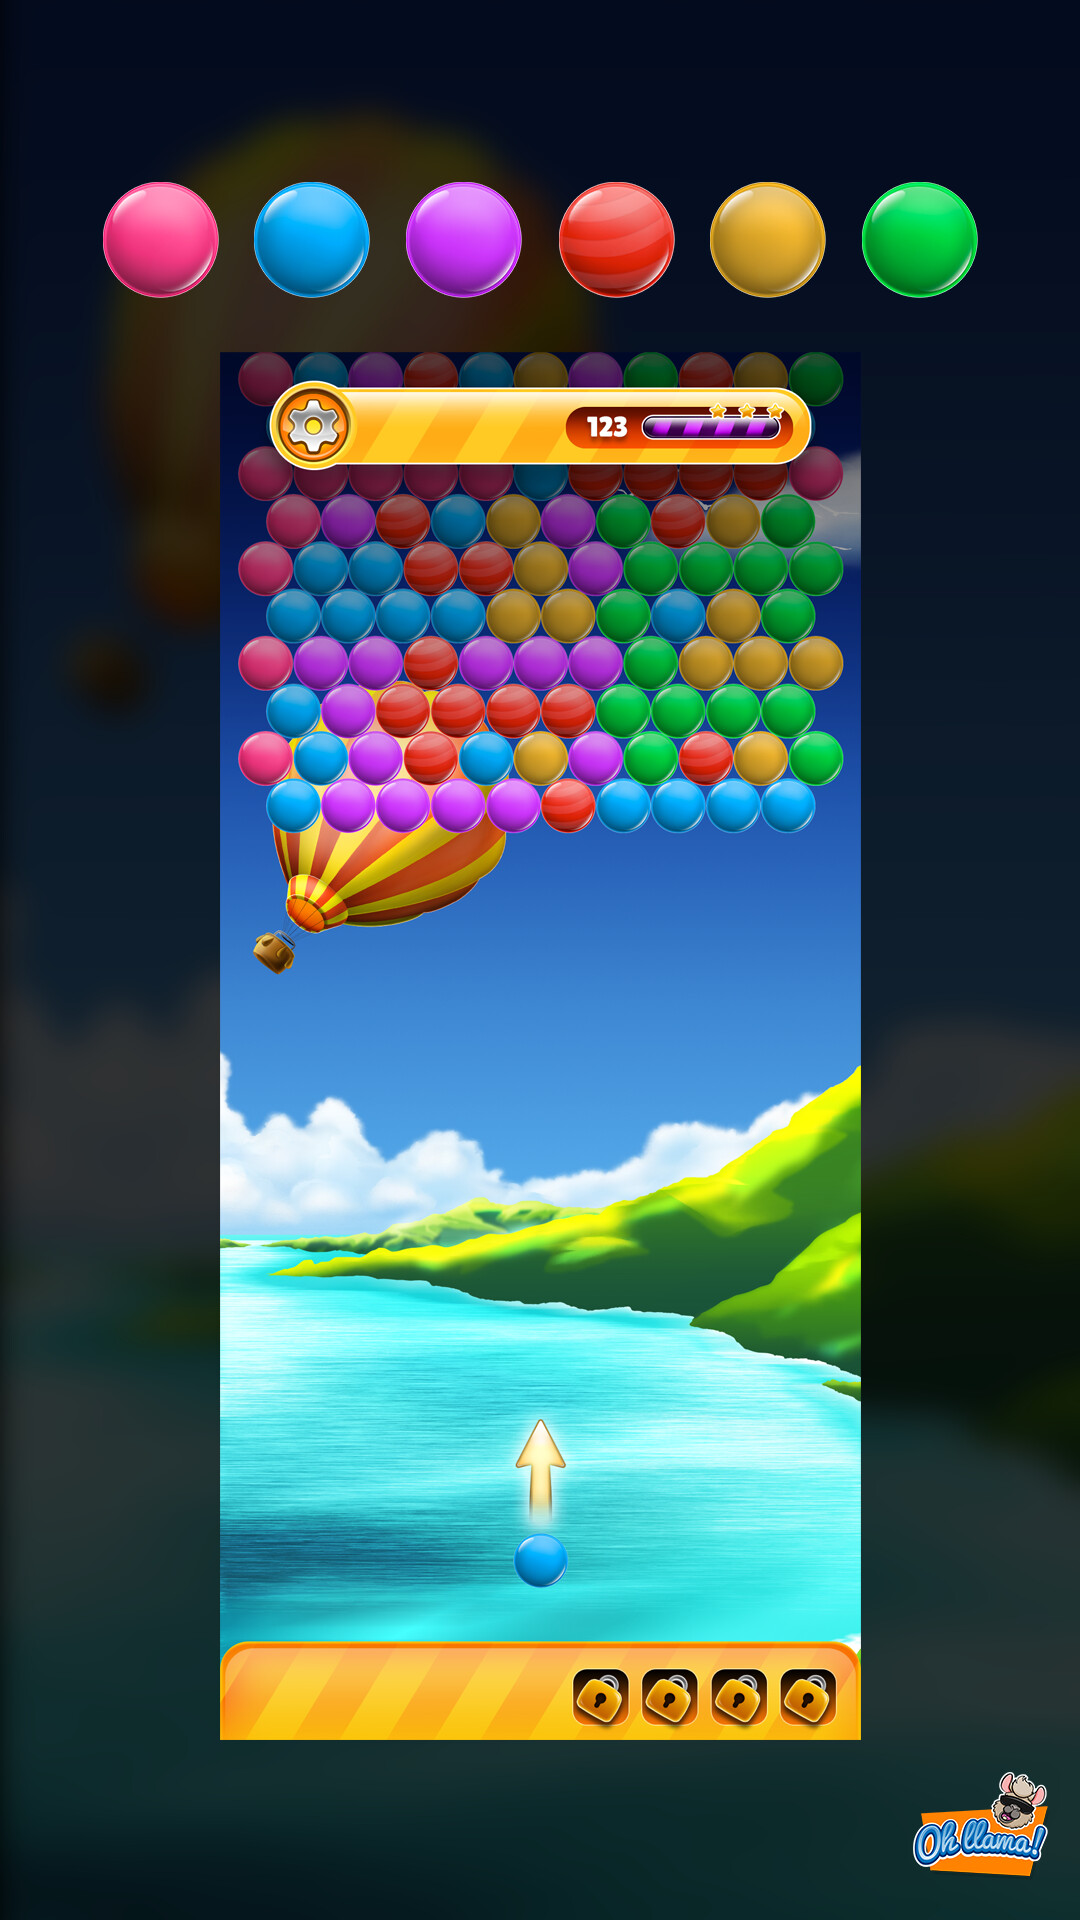 Ziv Ariely - POP THE BUBBLES, A BUBBLE SHOOTER GAME